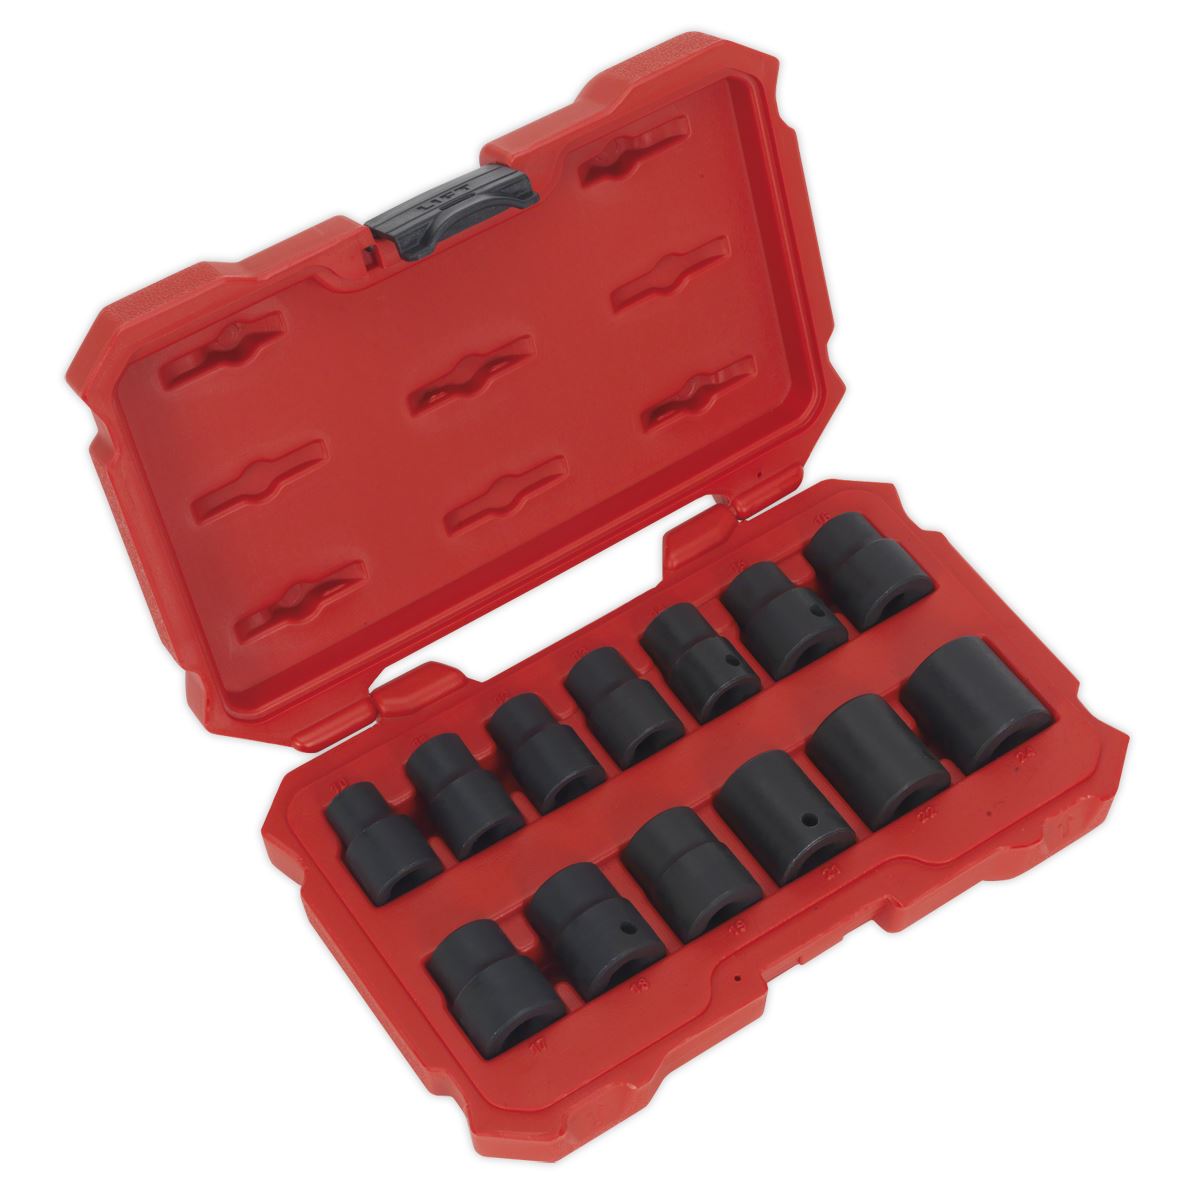 Sealey Premier 13 Piece 1/2" Drive Lock On Impact Socket Set 10-24mm Rounded Nuts